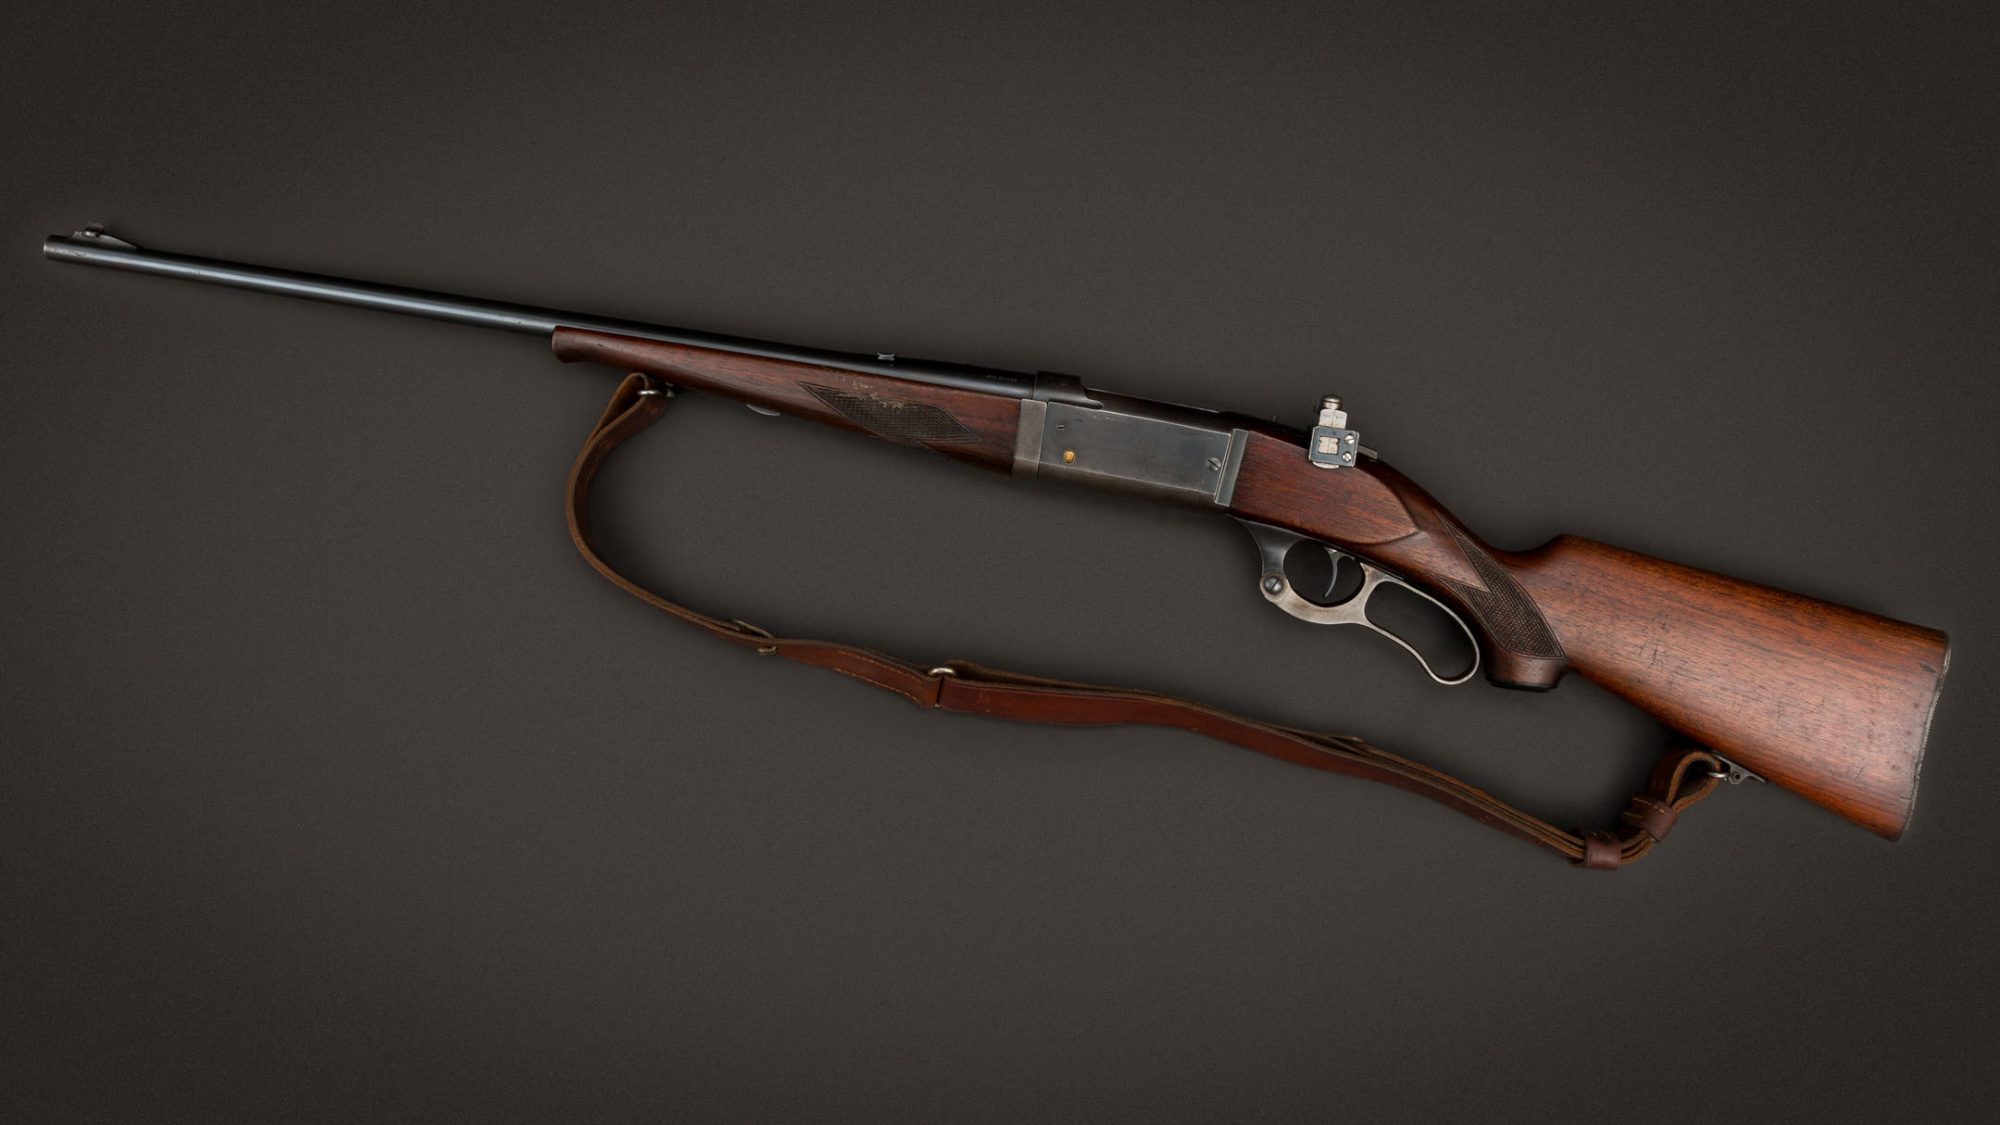 Savage Model 99 Takedown in 300 Savage, for sale by Turnbull Restoration of Bloomfield, NY